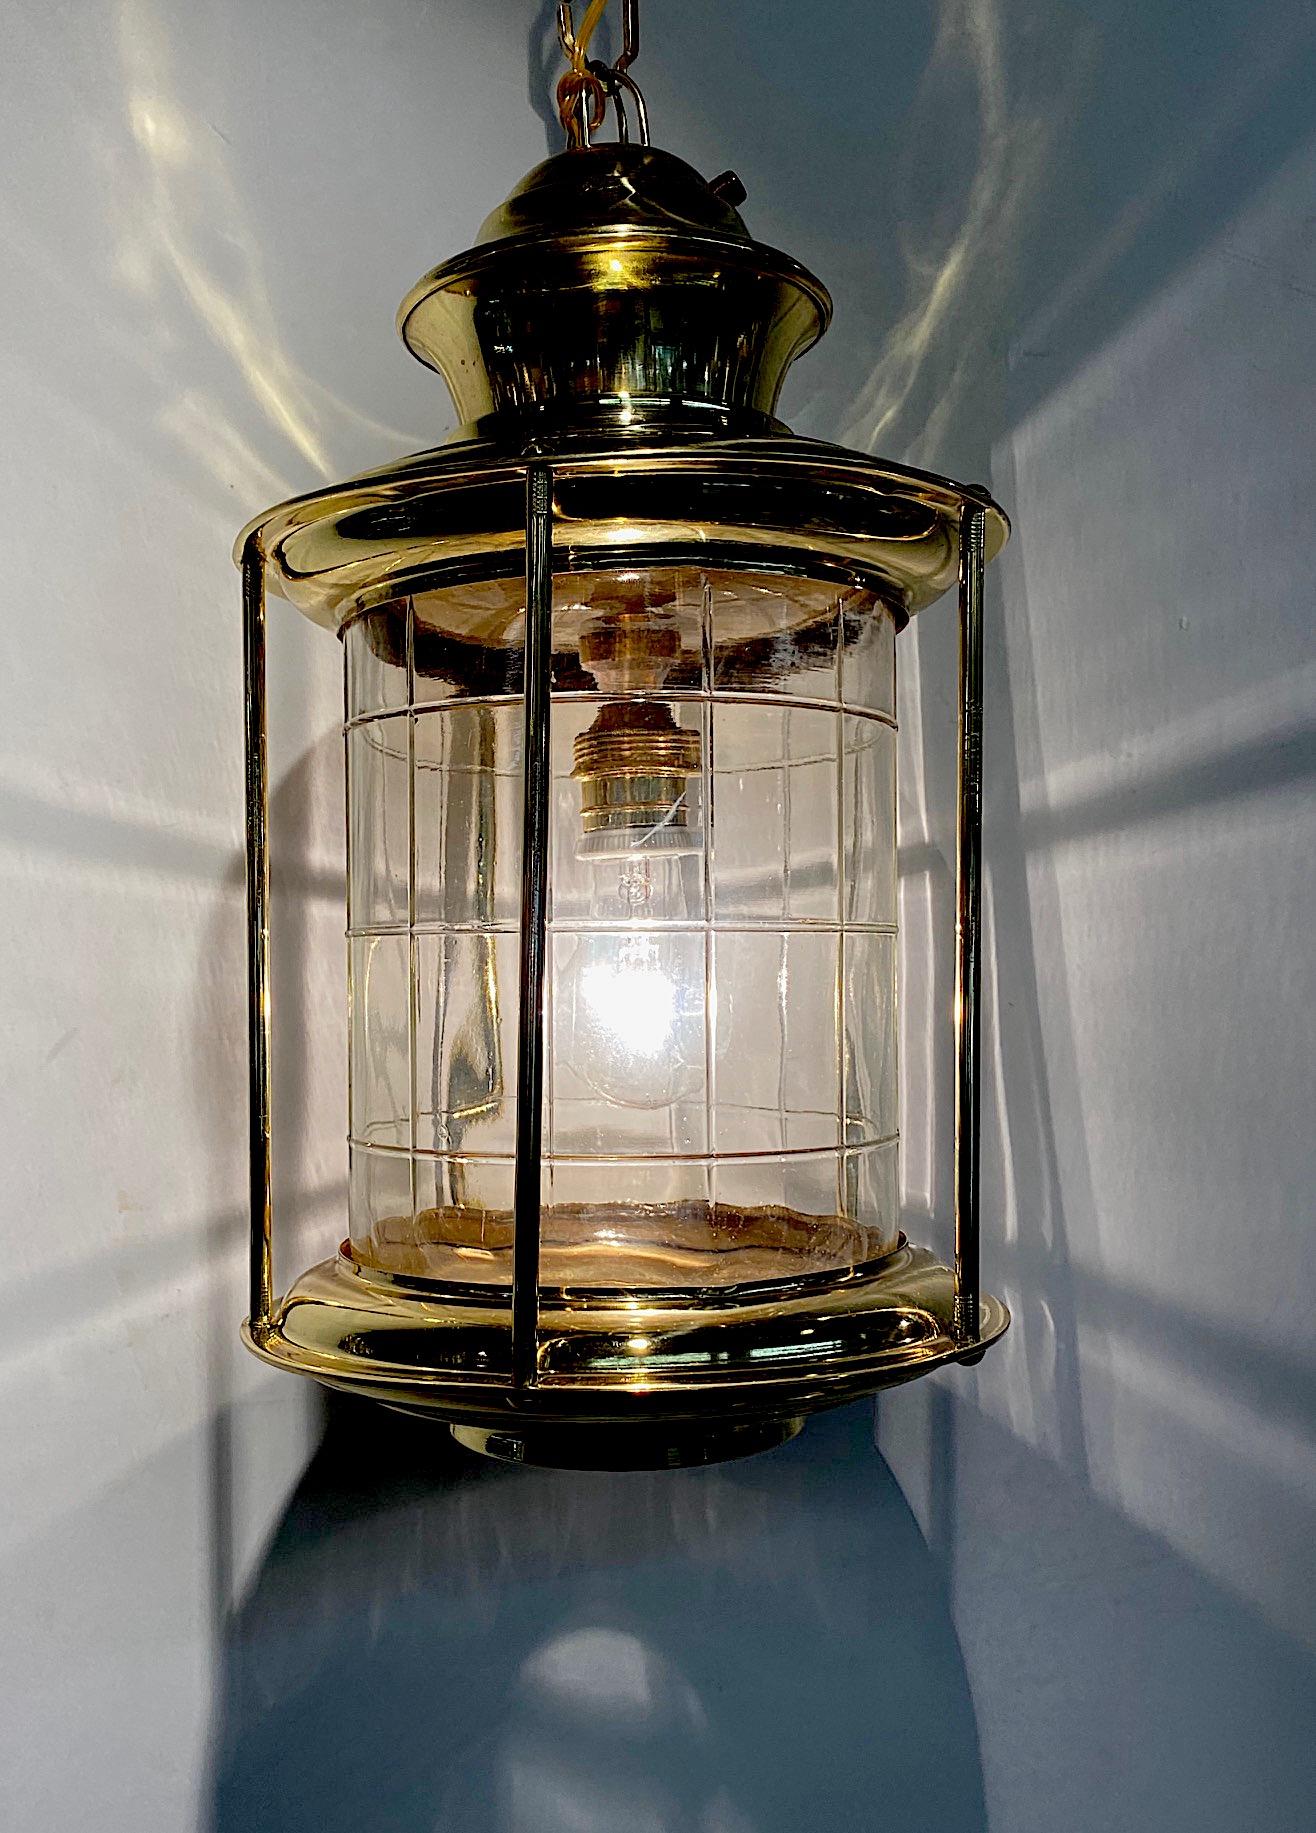 An Italian nautical style round pendant lantern in brass and blown glass circa 1950. The body of the lantern is 9 inches in diameter and 17 inches tall. Original brass decorative link chain is an 38 inches. The interior of the lantern has a blown